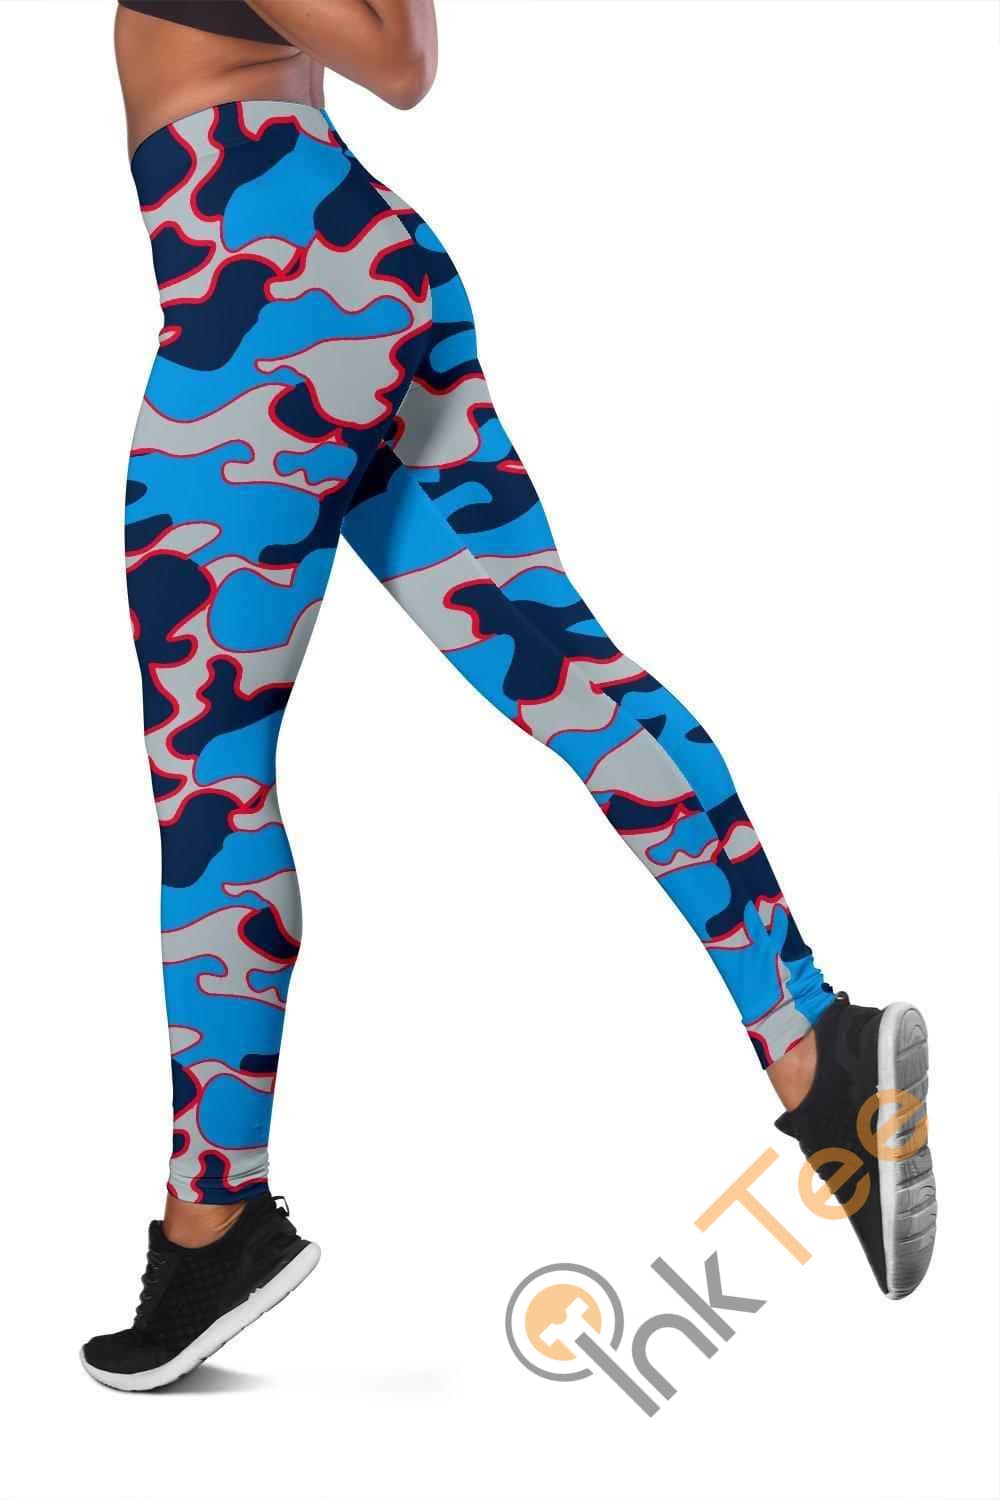 Inktee Store - Tennessee Titans Inspired Tru Camo 3D All Over Print For Yoga Fitness Fashion Women'S Leggings Image